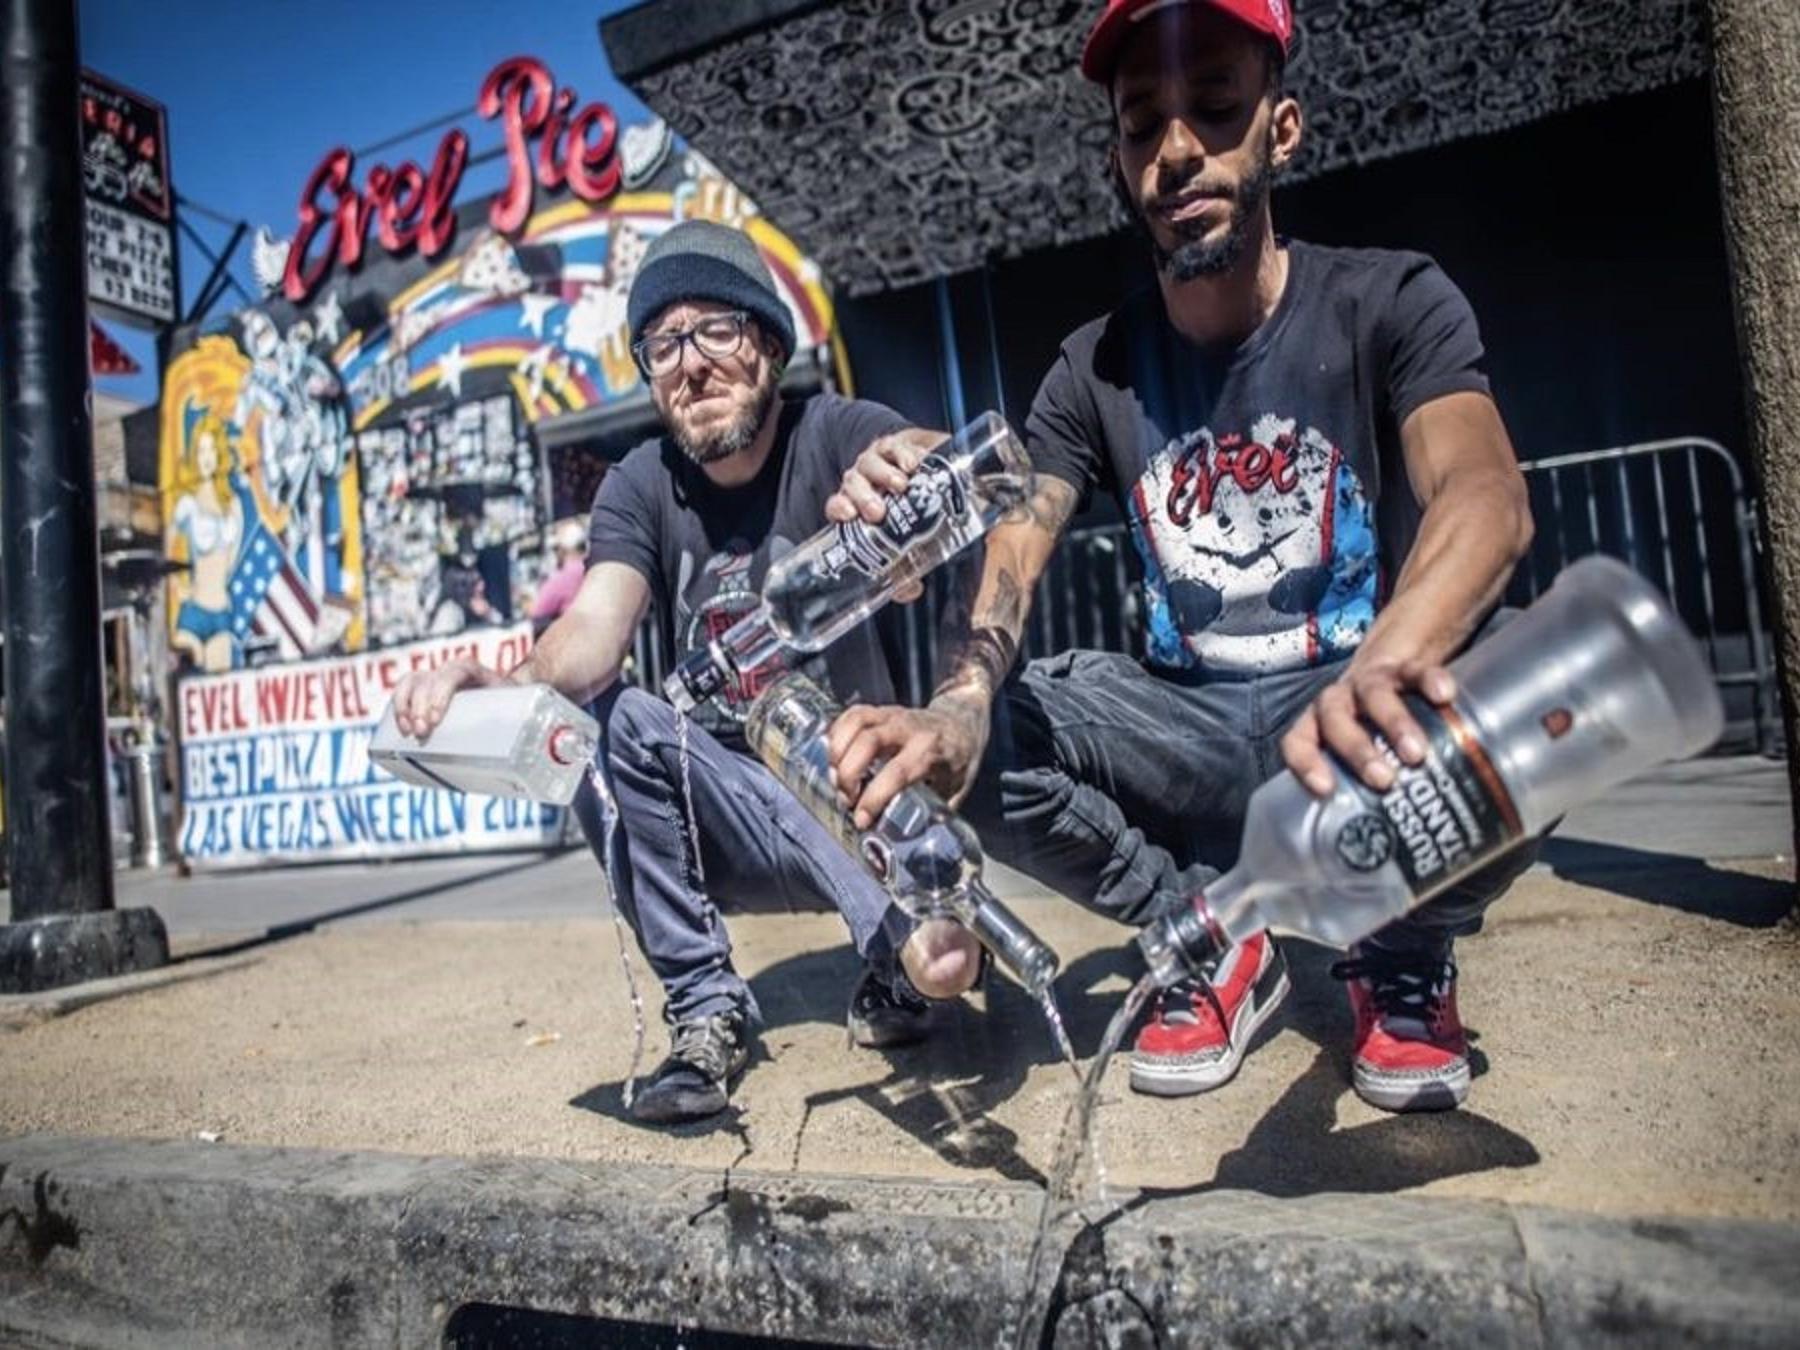 Two punk rockers pouring out bottles of vodka in the gutter, graffiti wall background